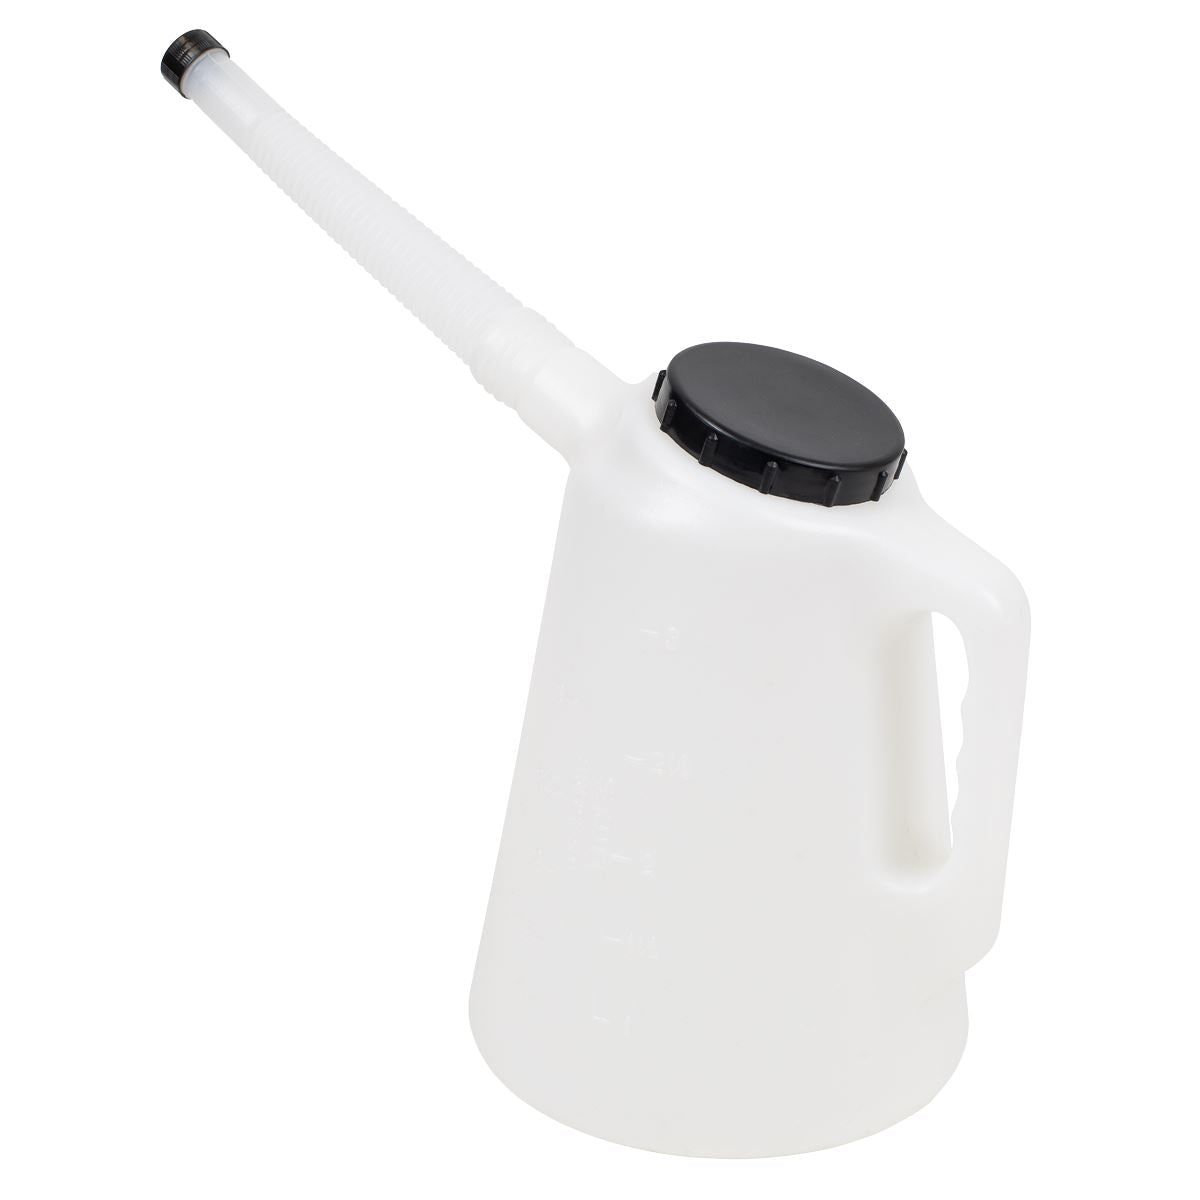 Sealey Oil Container with Flexible Spout 3L - Black Lid